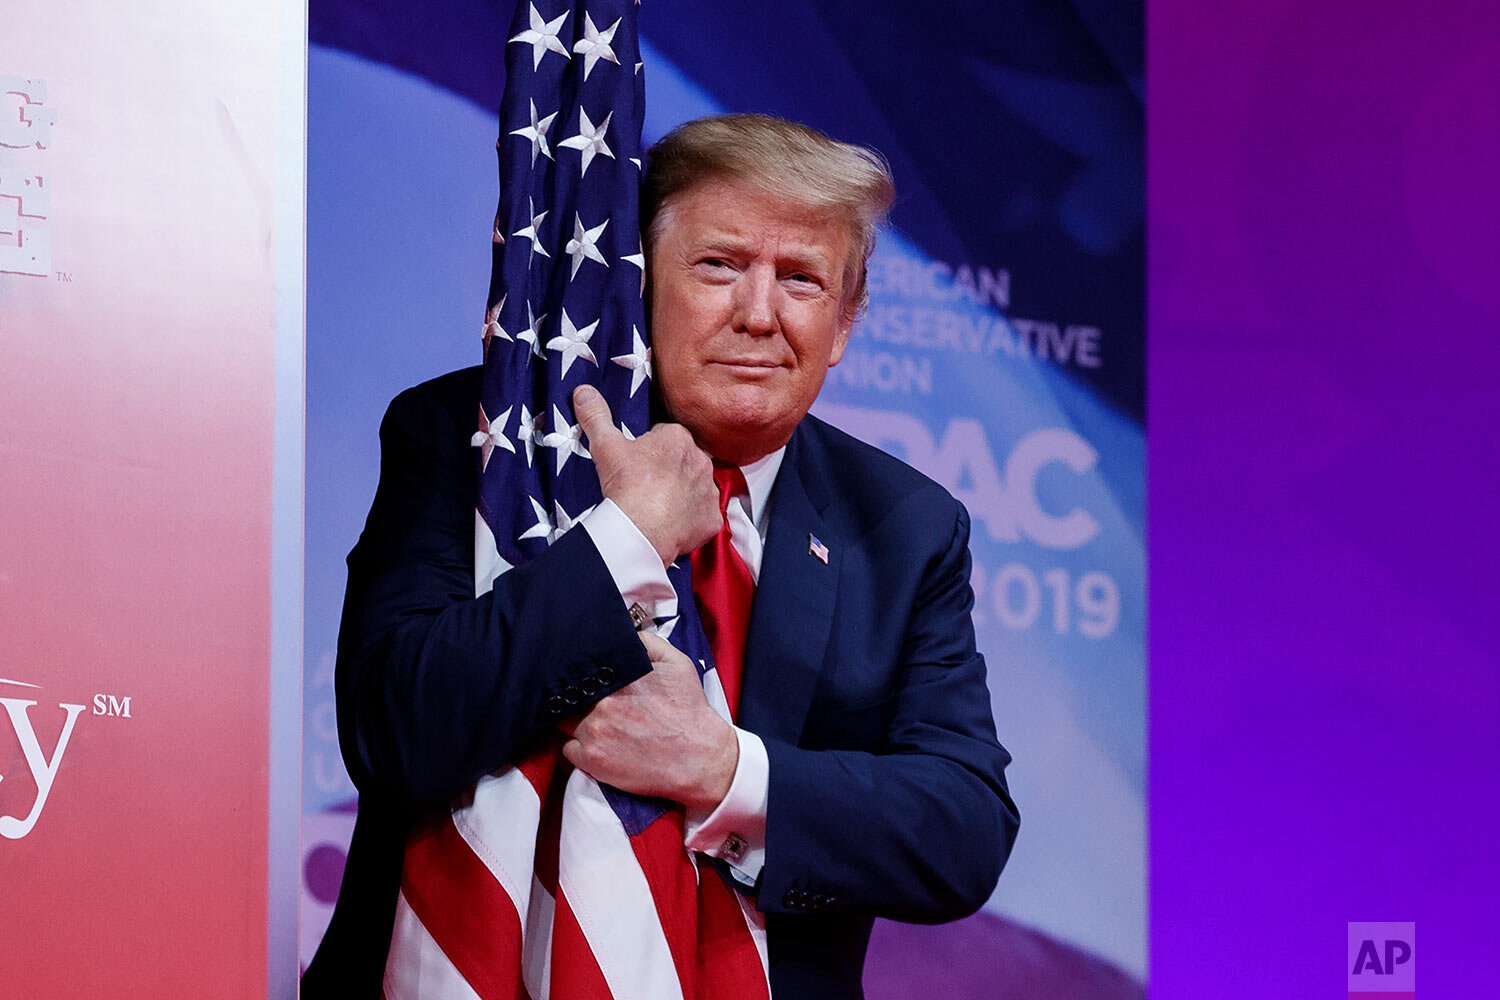  President Donald Trump hugs the American flag as he arrives to speak at the Conservative Political Action Conference, CPAC 2019, in Oxon Hill, Md., on March 2, 2019. (AP Photo/Carolyn Kaster) 